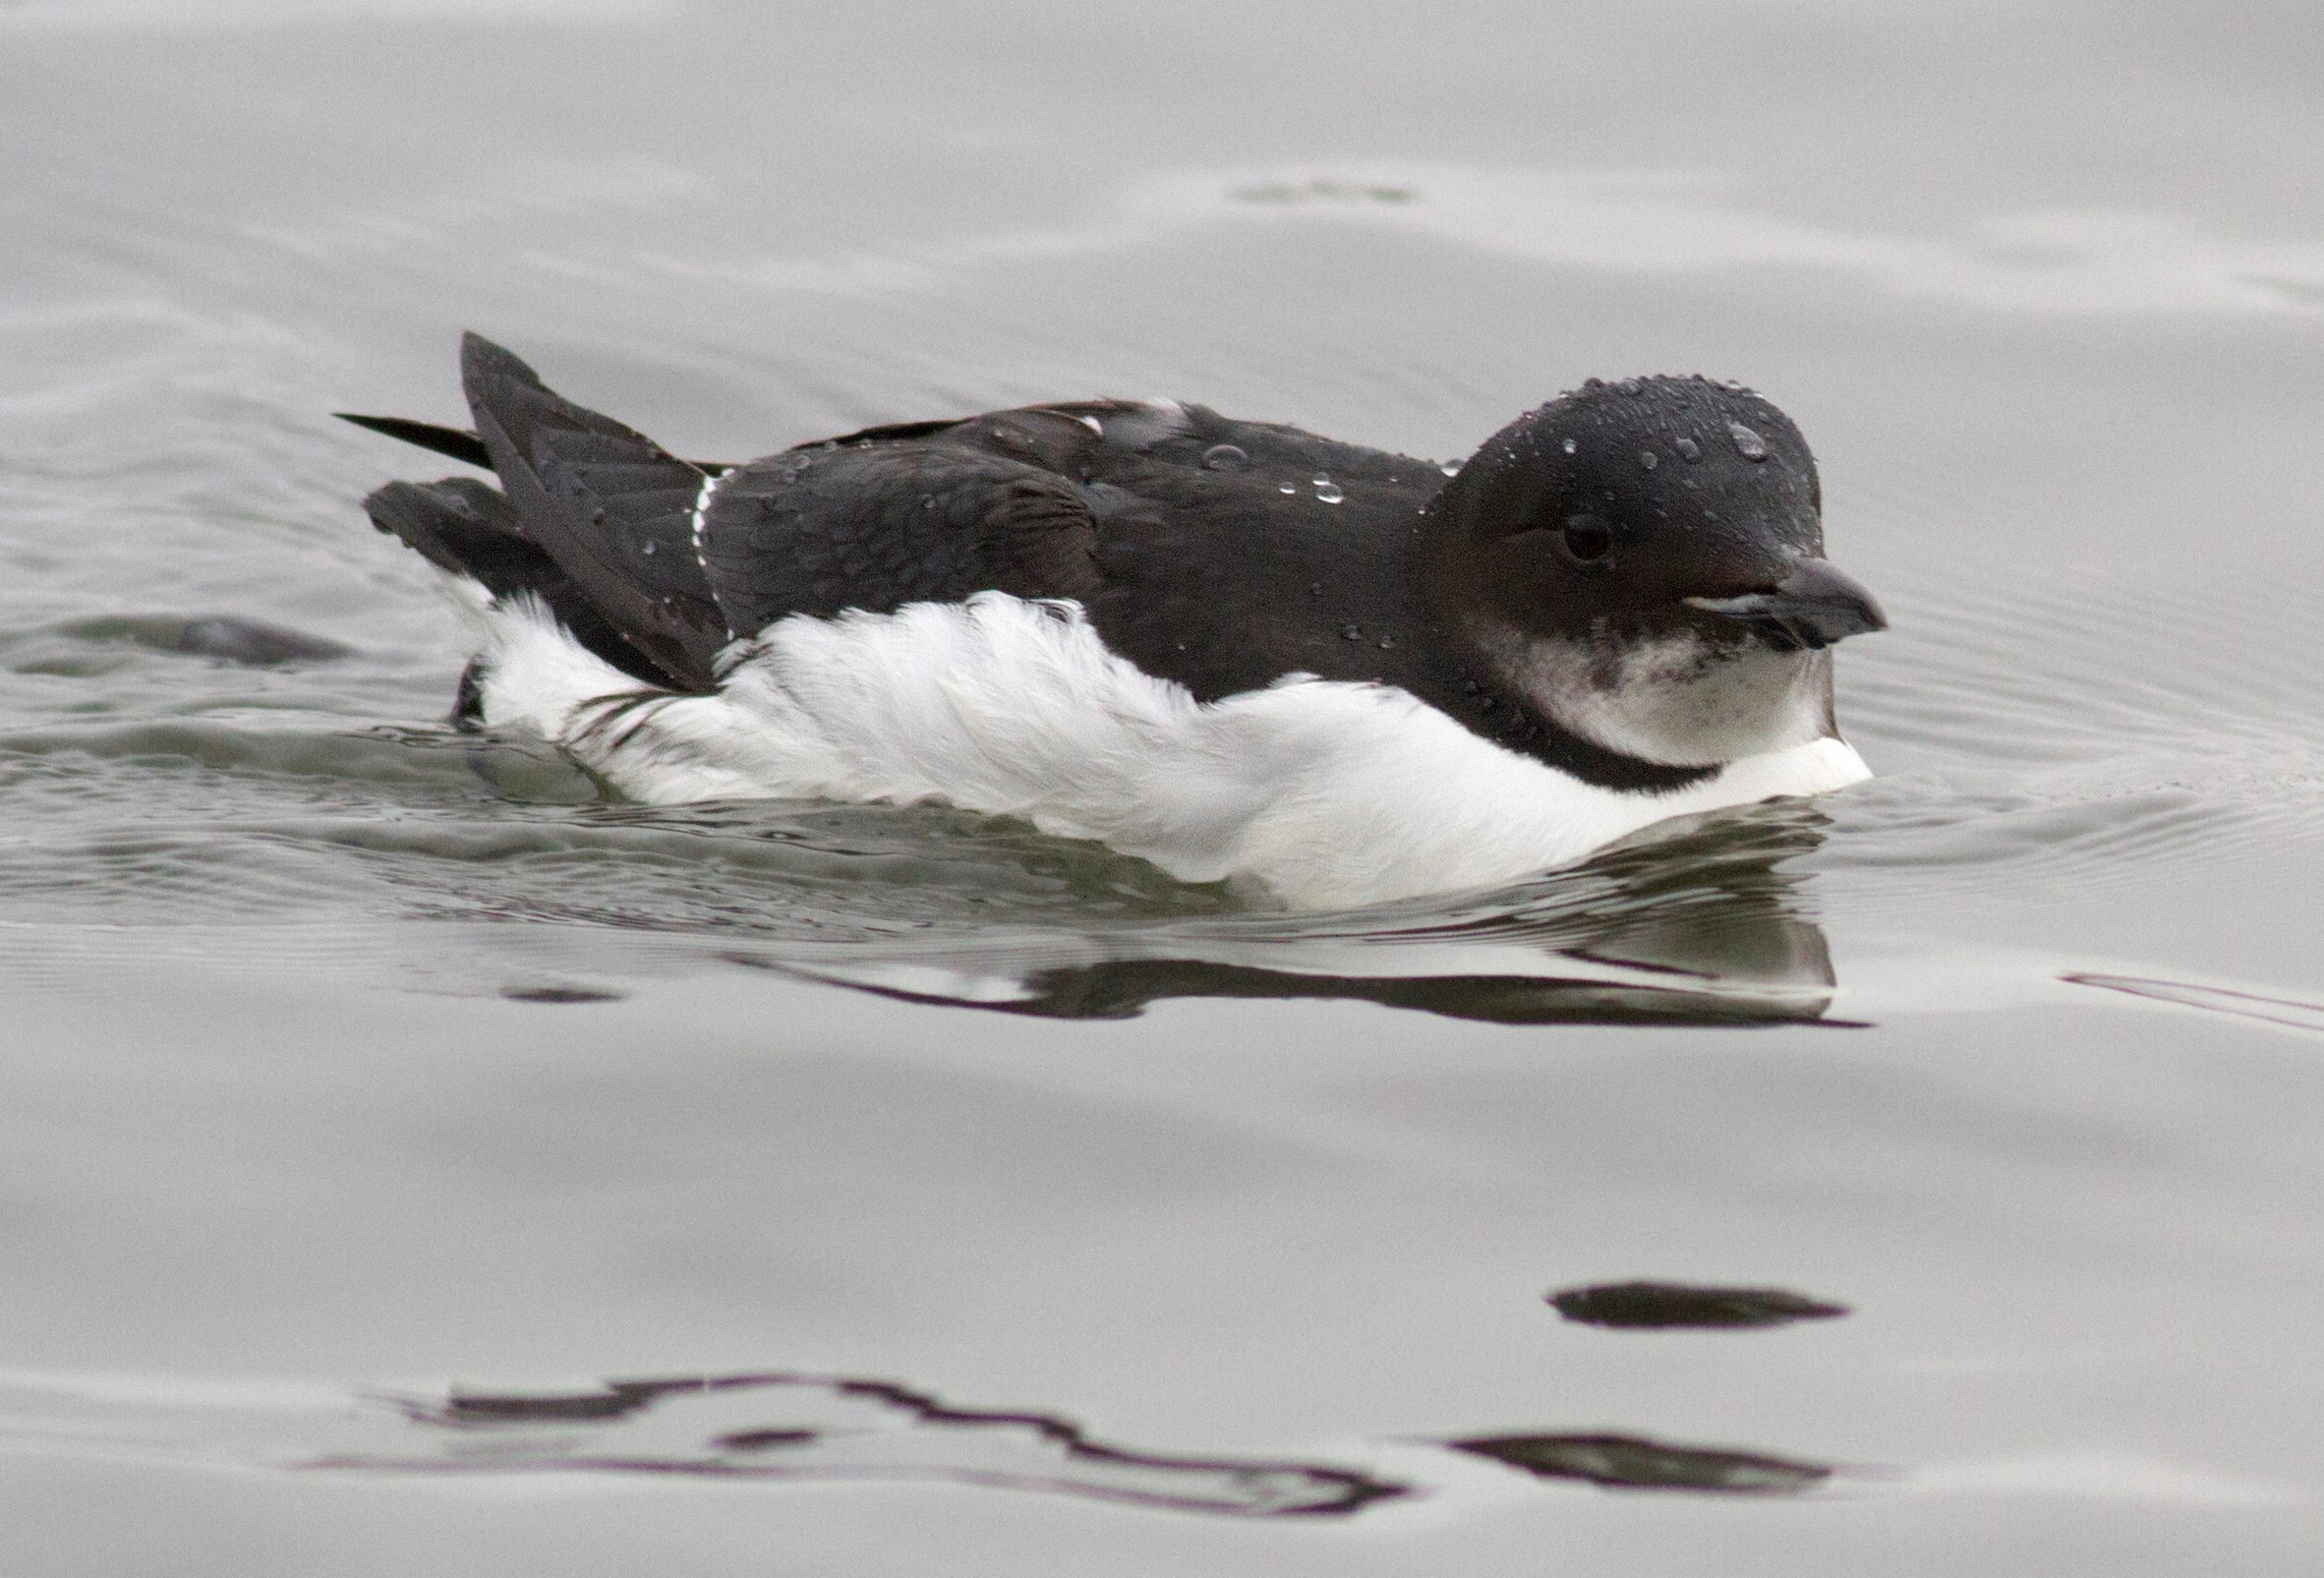 This Thick-billed Murre, a rare visitor to New York City, was found in the waters of Marine Park. Photo: <a href="https://bvandoren.com/" target="_blank">Benjamin Van Doren</a>